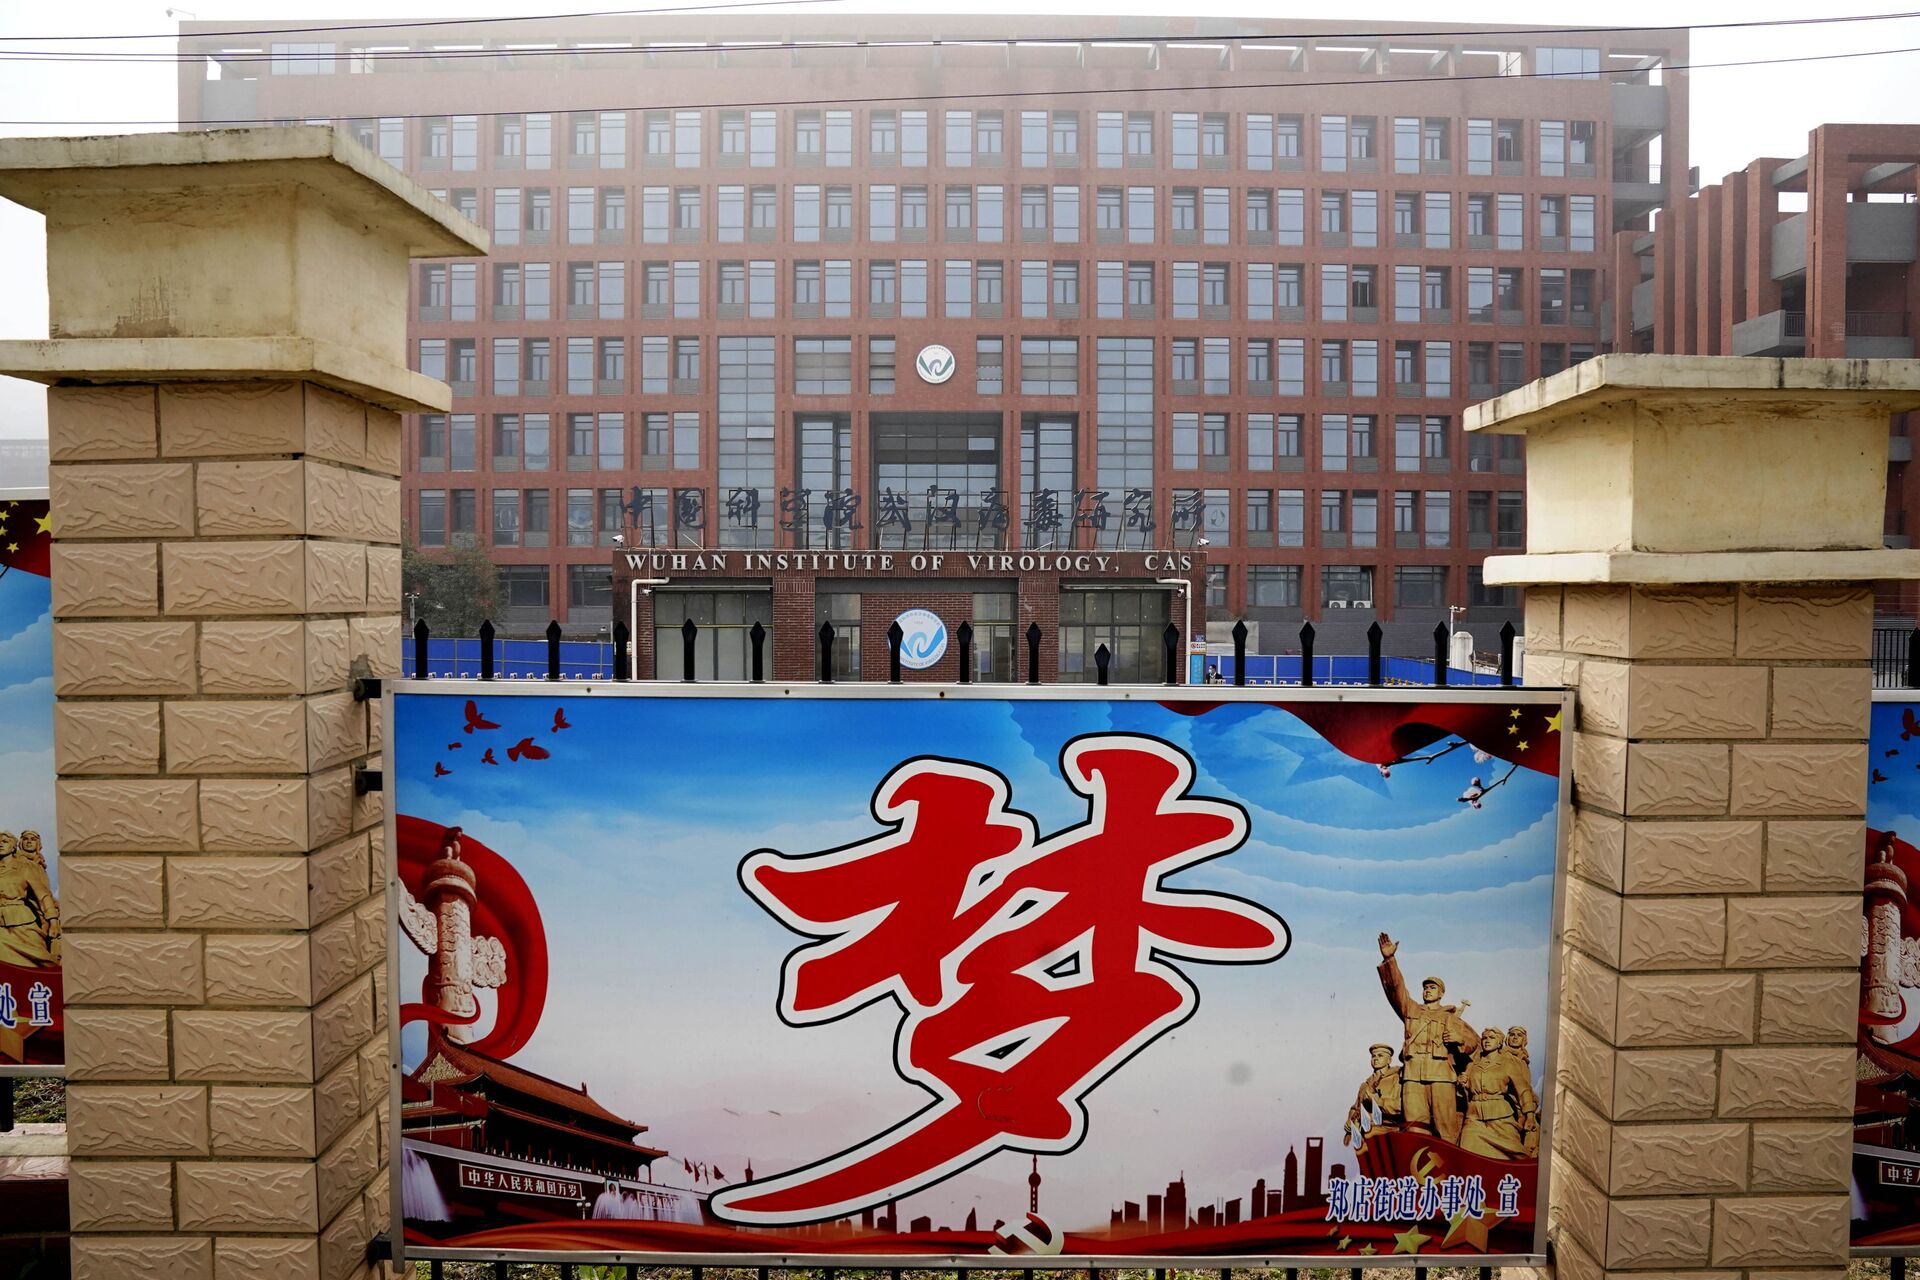 The Wuhan Institute of Virology is seen near the Chinese character for Dream during a visit by the World Health Organization team in Wuhan, China, Wednesday, Feb. 3, 2021 - Sputnik International, 1920, 07.09.2021